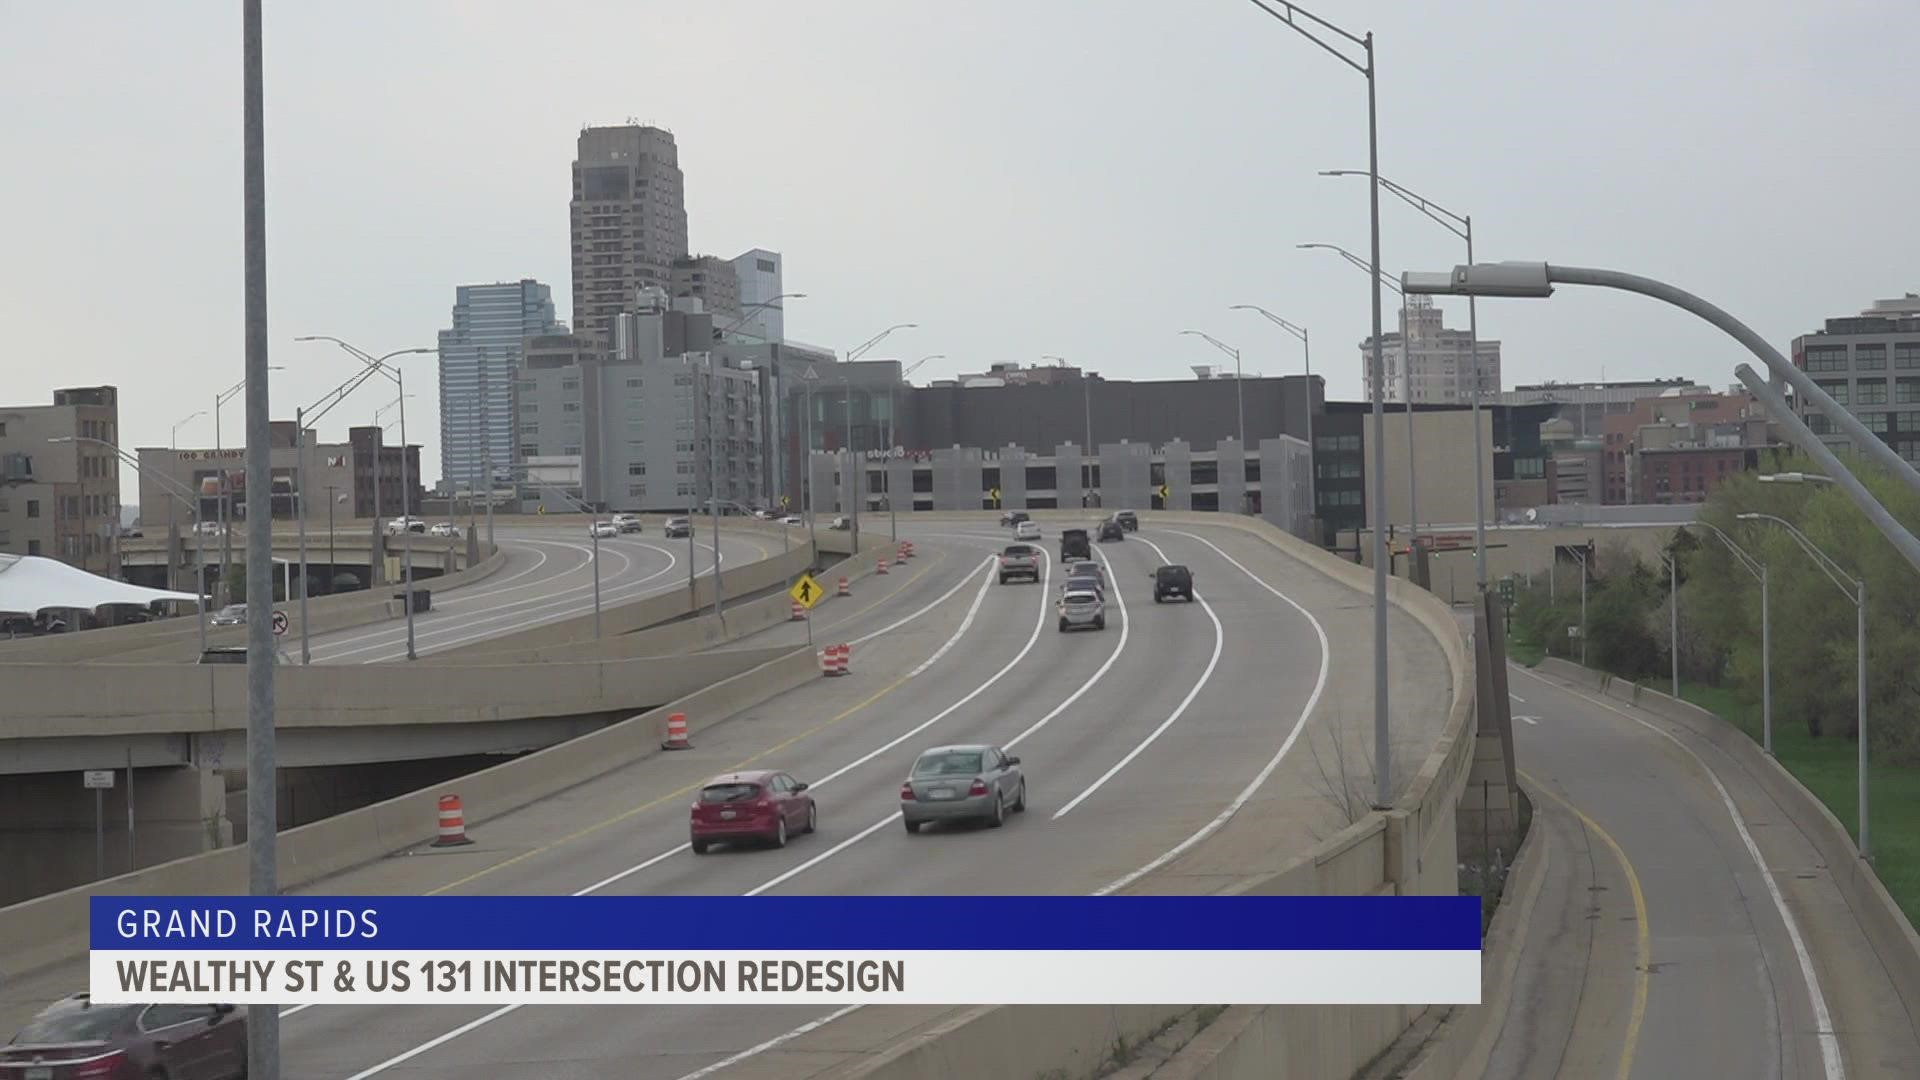 In a few years time, Wealthy Street could run underneath US-131. The city is receiving a $10 million grant from the state to fund the design.